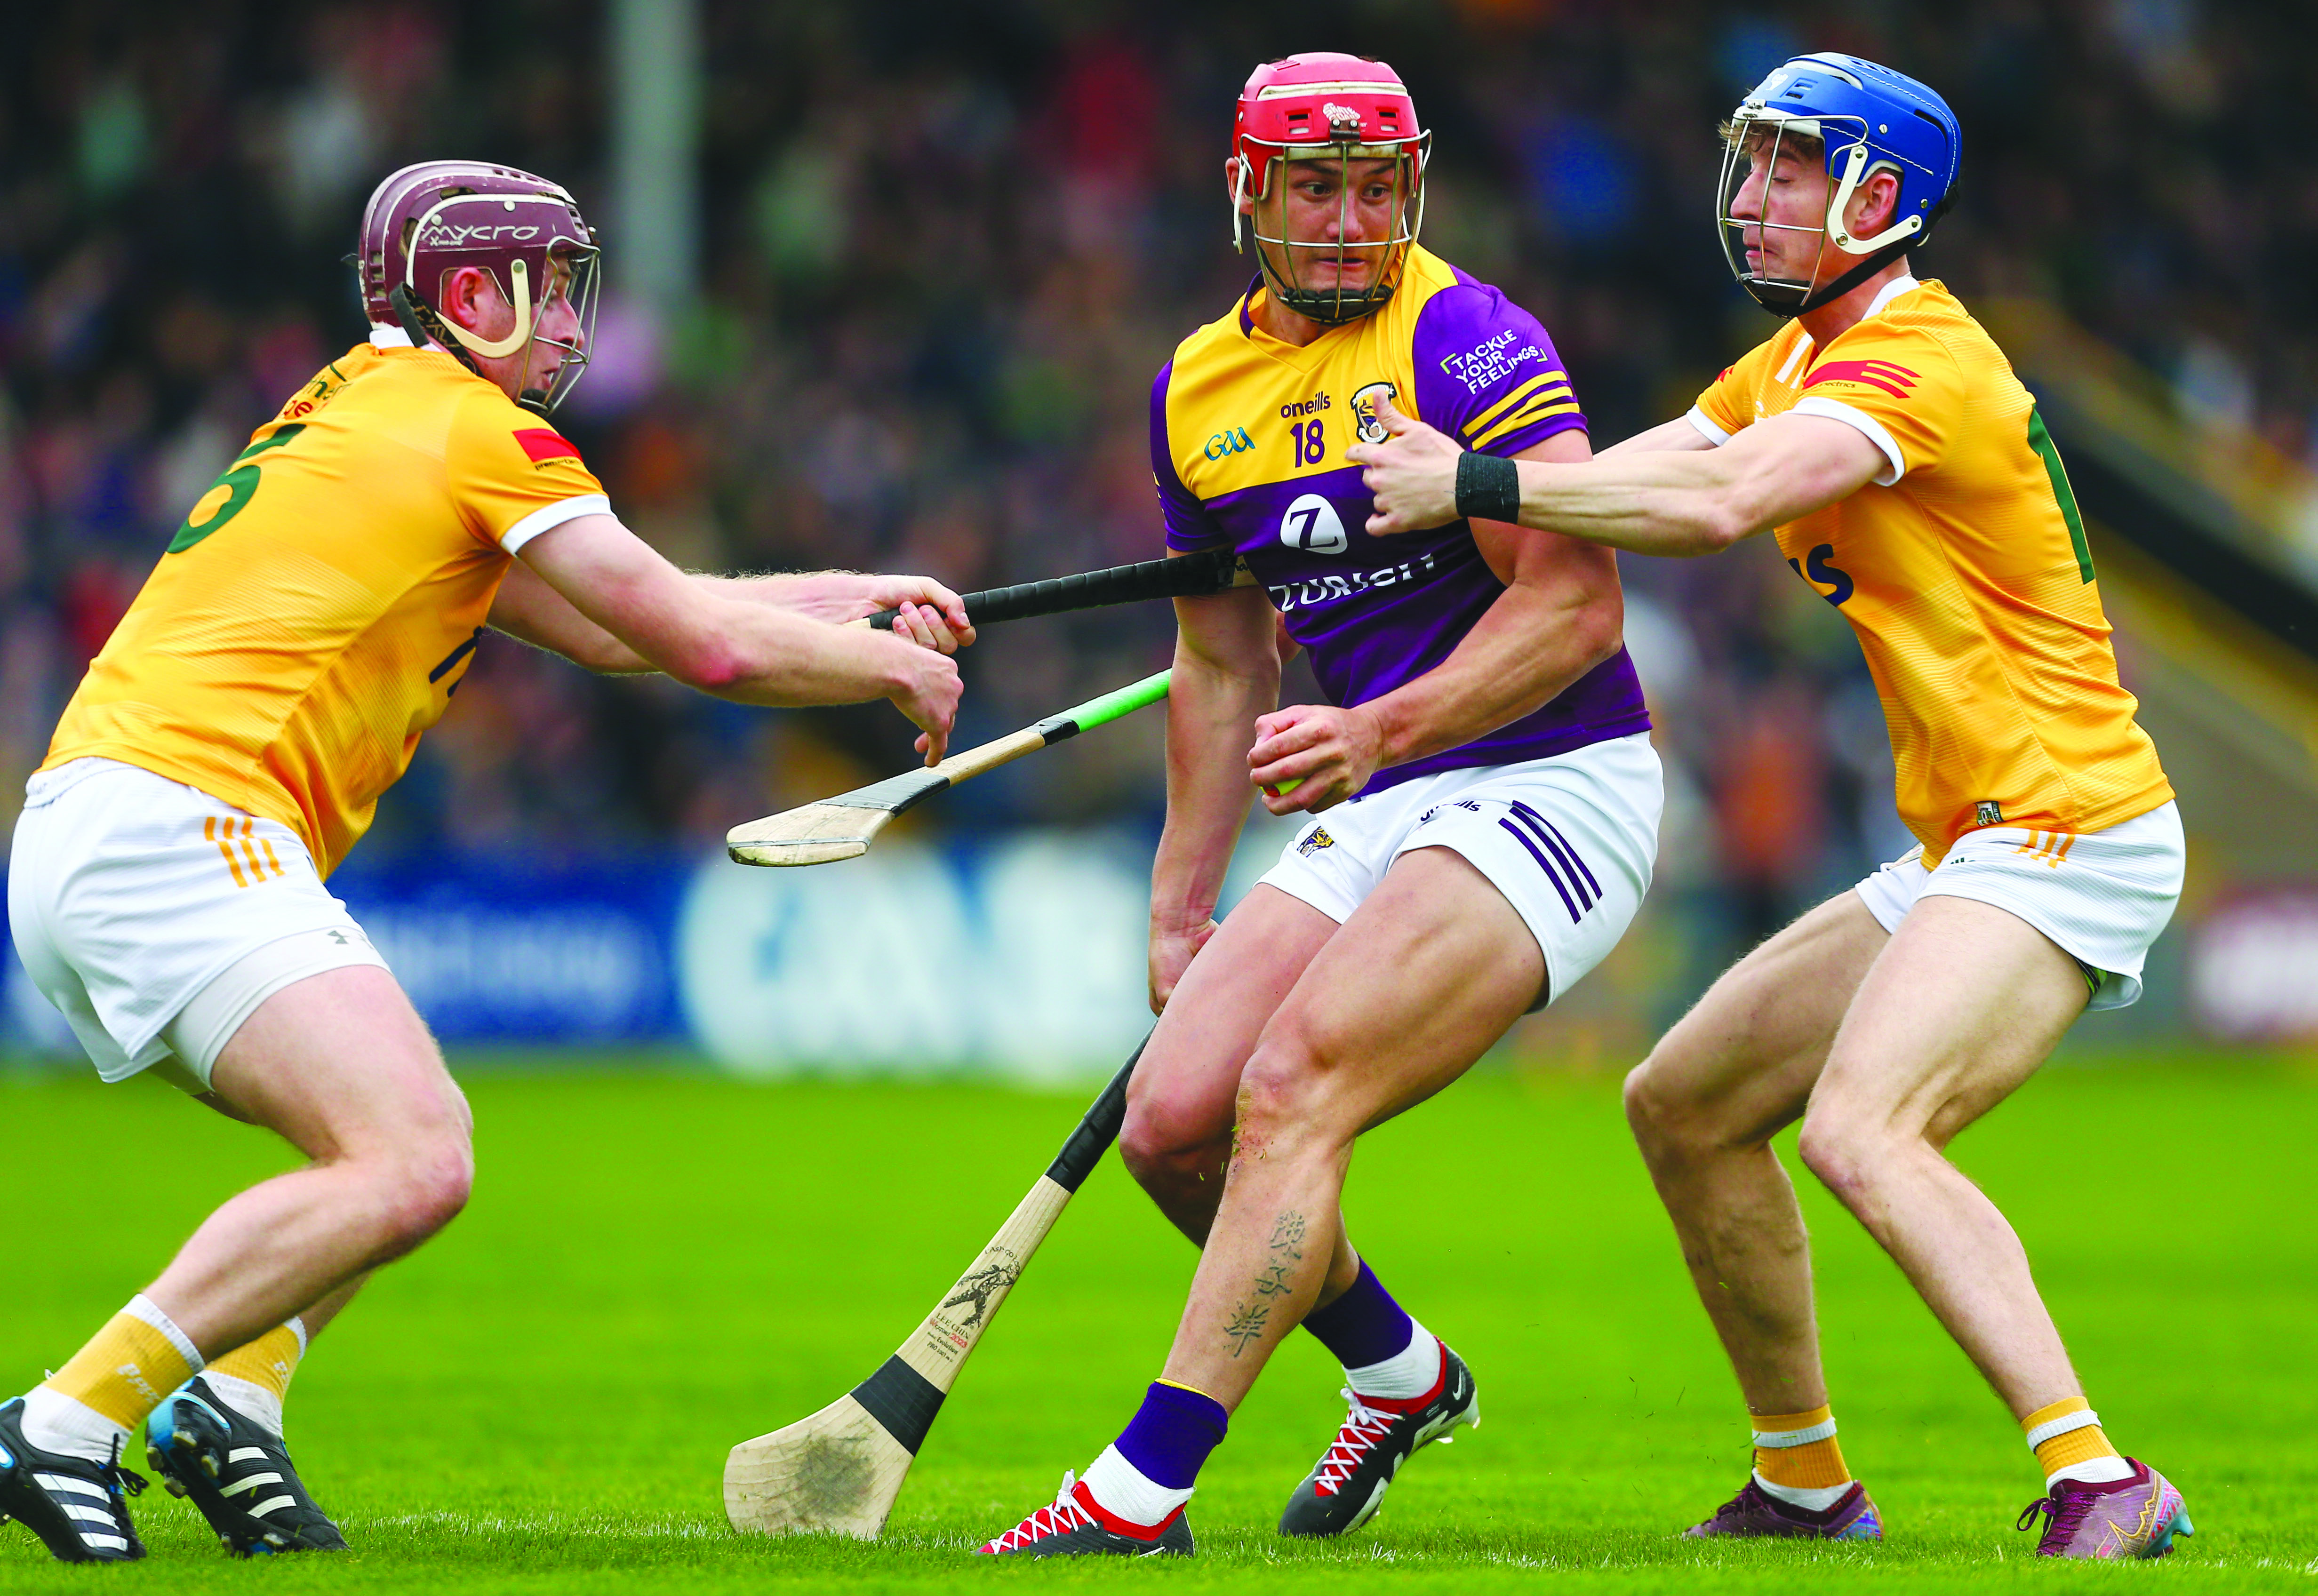 Lee Chin is challenged by Eoghan Campbell and James McNaughton during Wexford’s win over Antrim last year